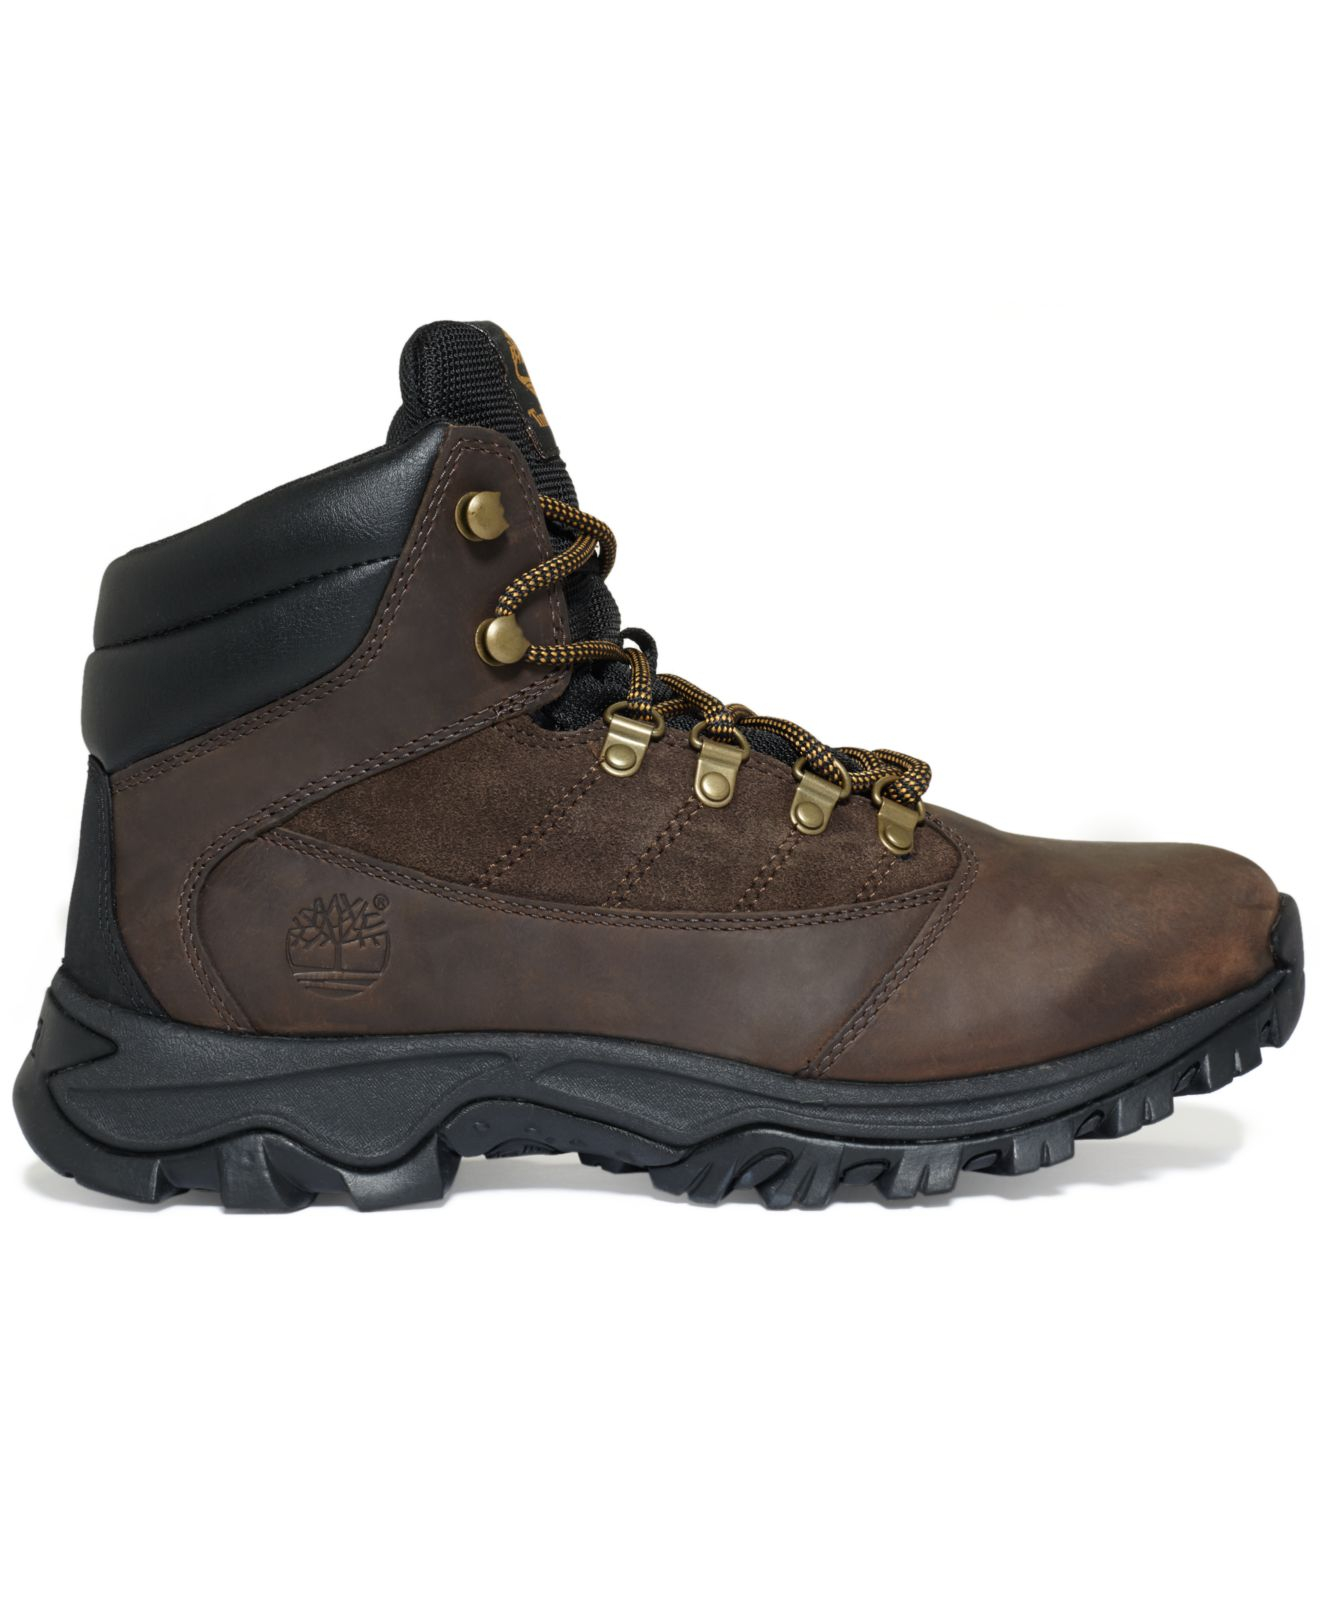 Timberland Men's Rangeley Mid Leather Hiker Boots in Brown for Men - Lyst